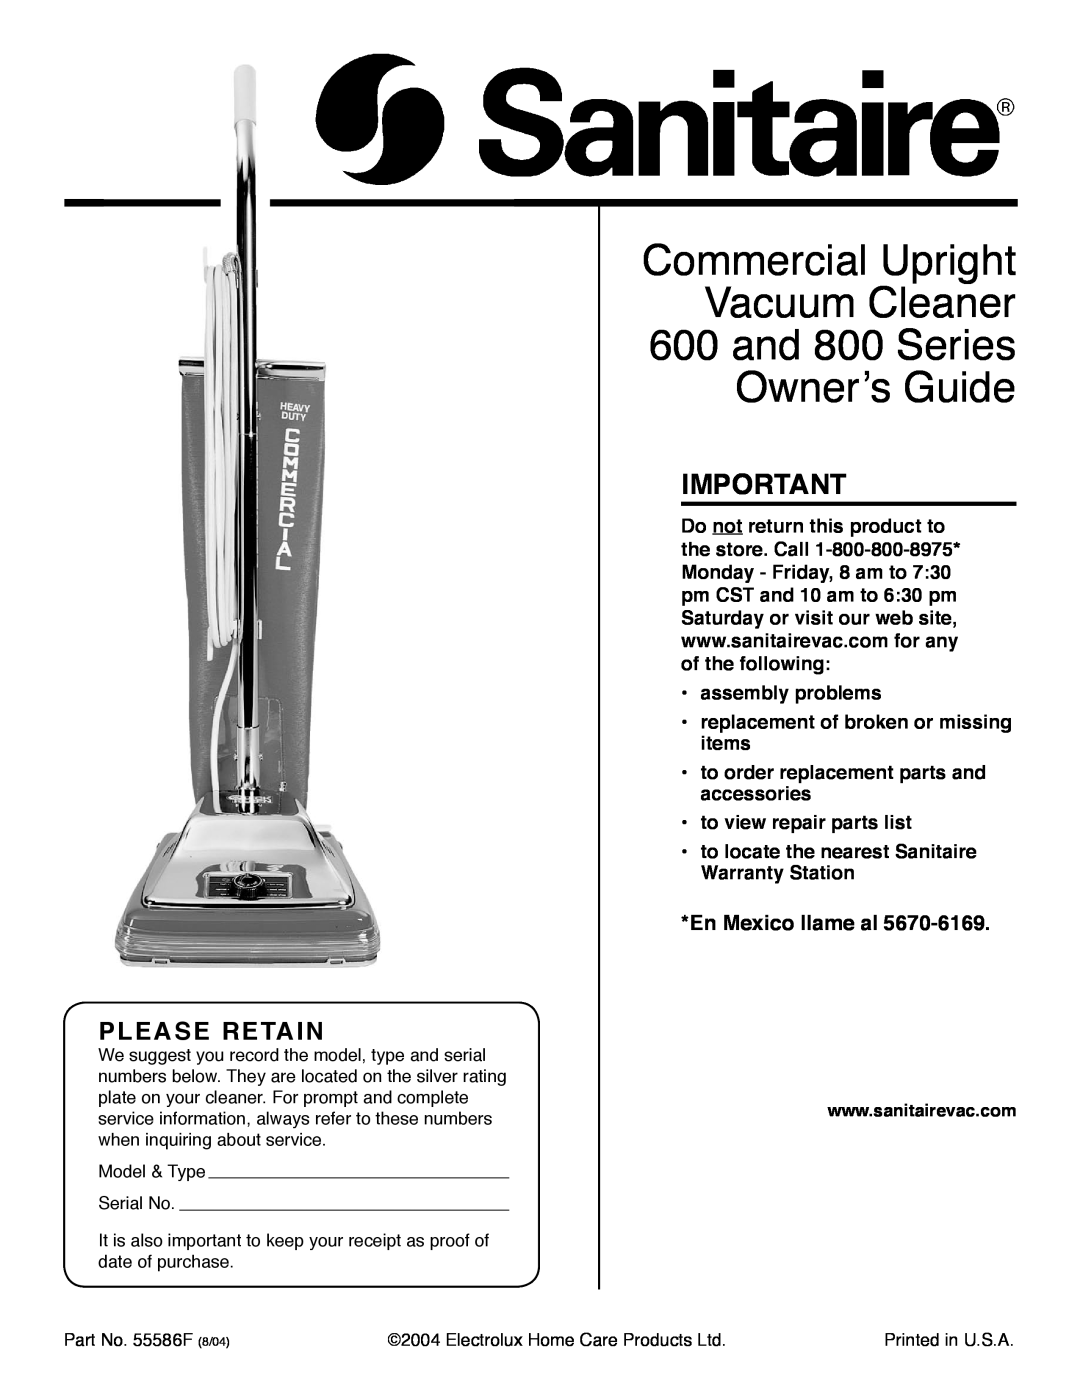 Sanitaire 600 warranty En Mexico llame al, Commercial Upright Vacuum Cleaner, and 800 Series Ownerʼs Guide, Please Retain 